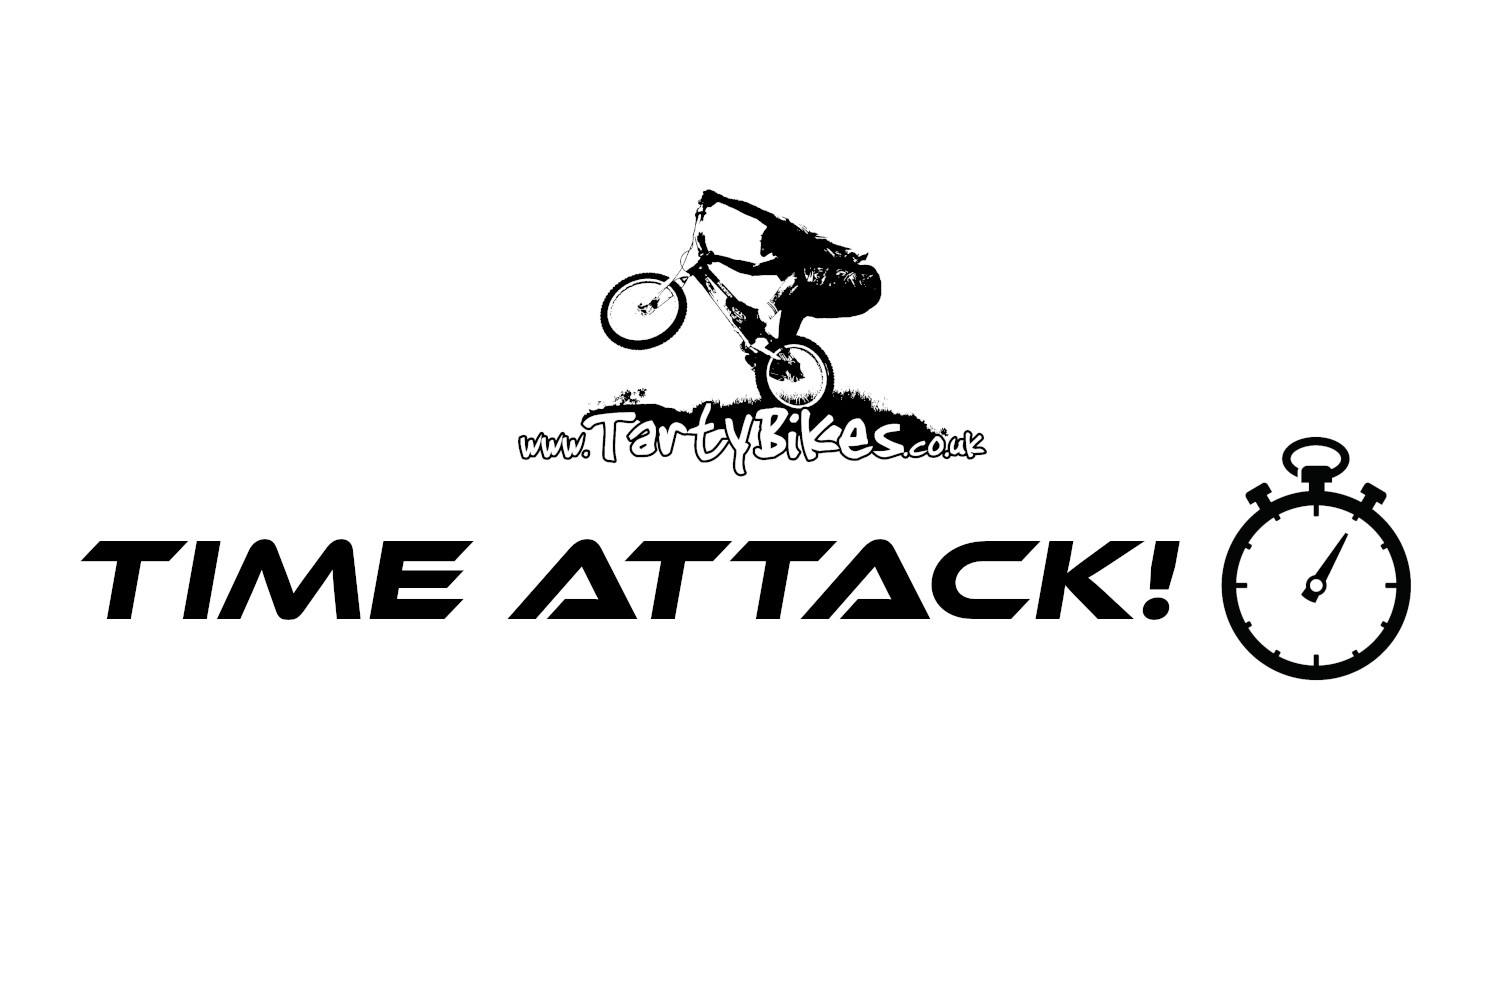 Tarty Bikes Time Attack! - A new upcoming event